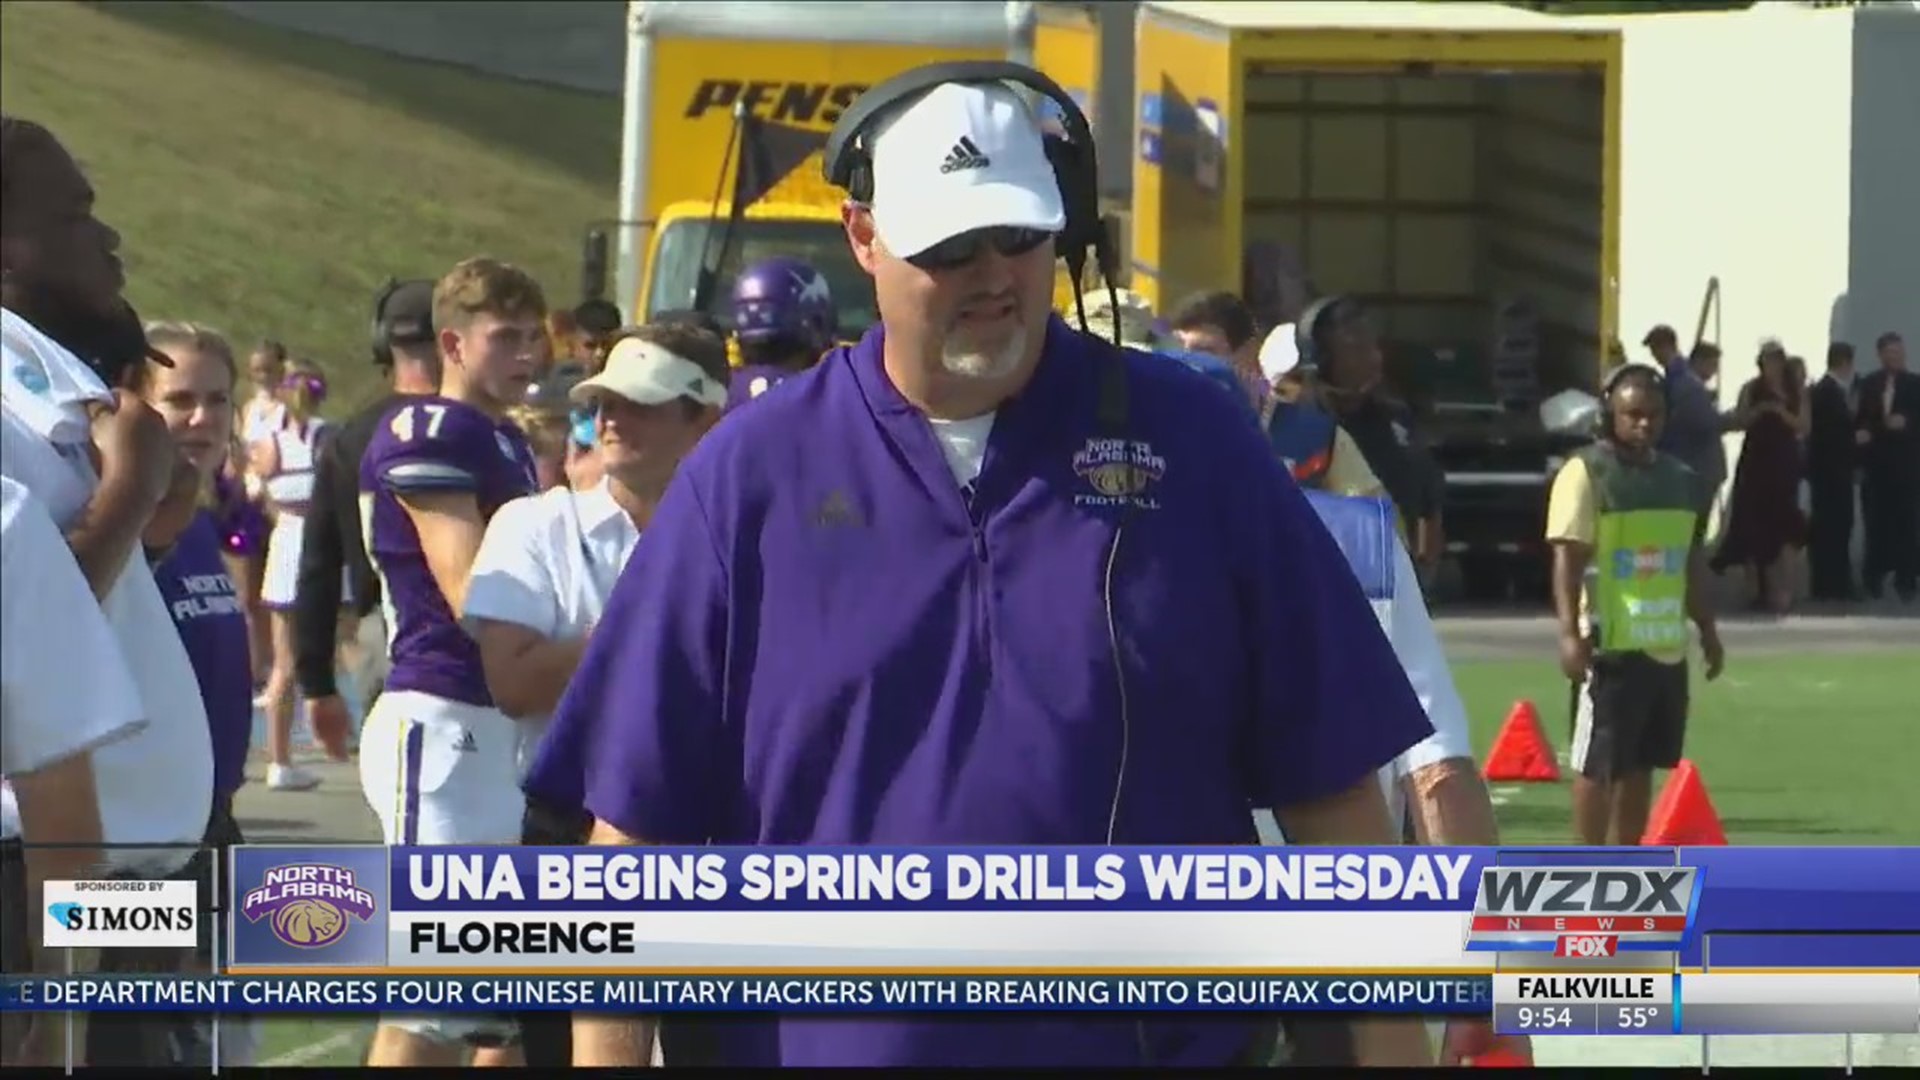 The University of North Alabama football team will officially begin Spring drills on Wednesday at 3:00 p.m. when the Lions take the field for the first of 15 days of practice.